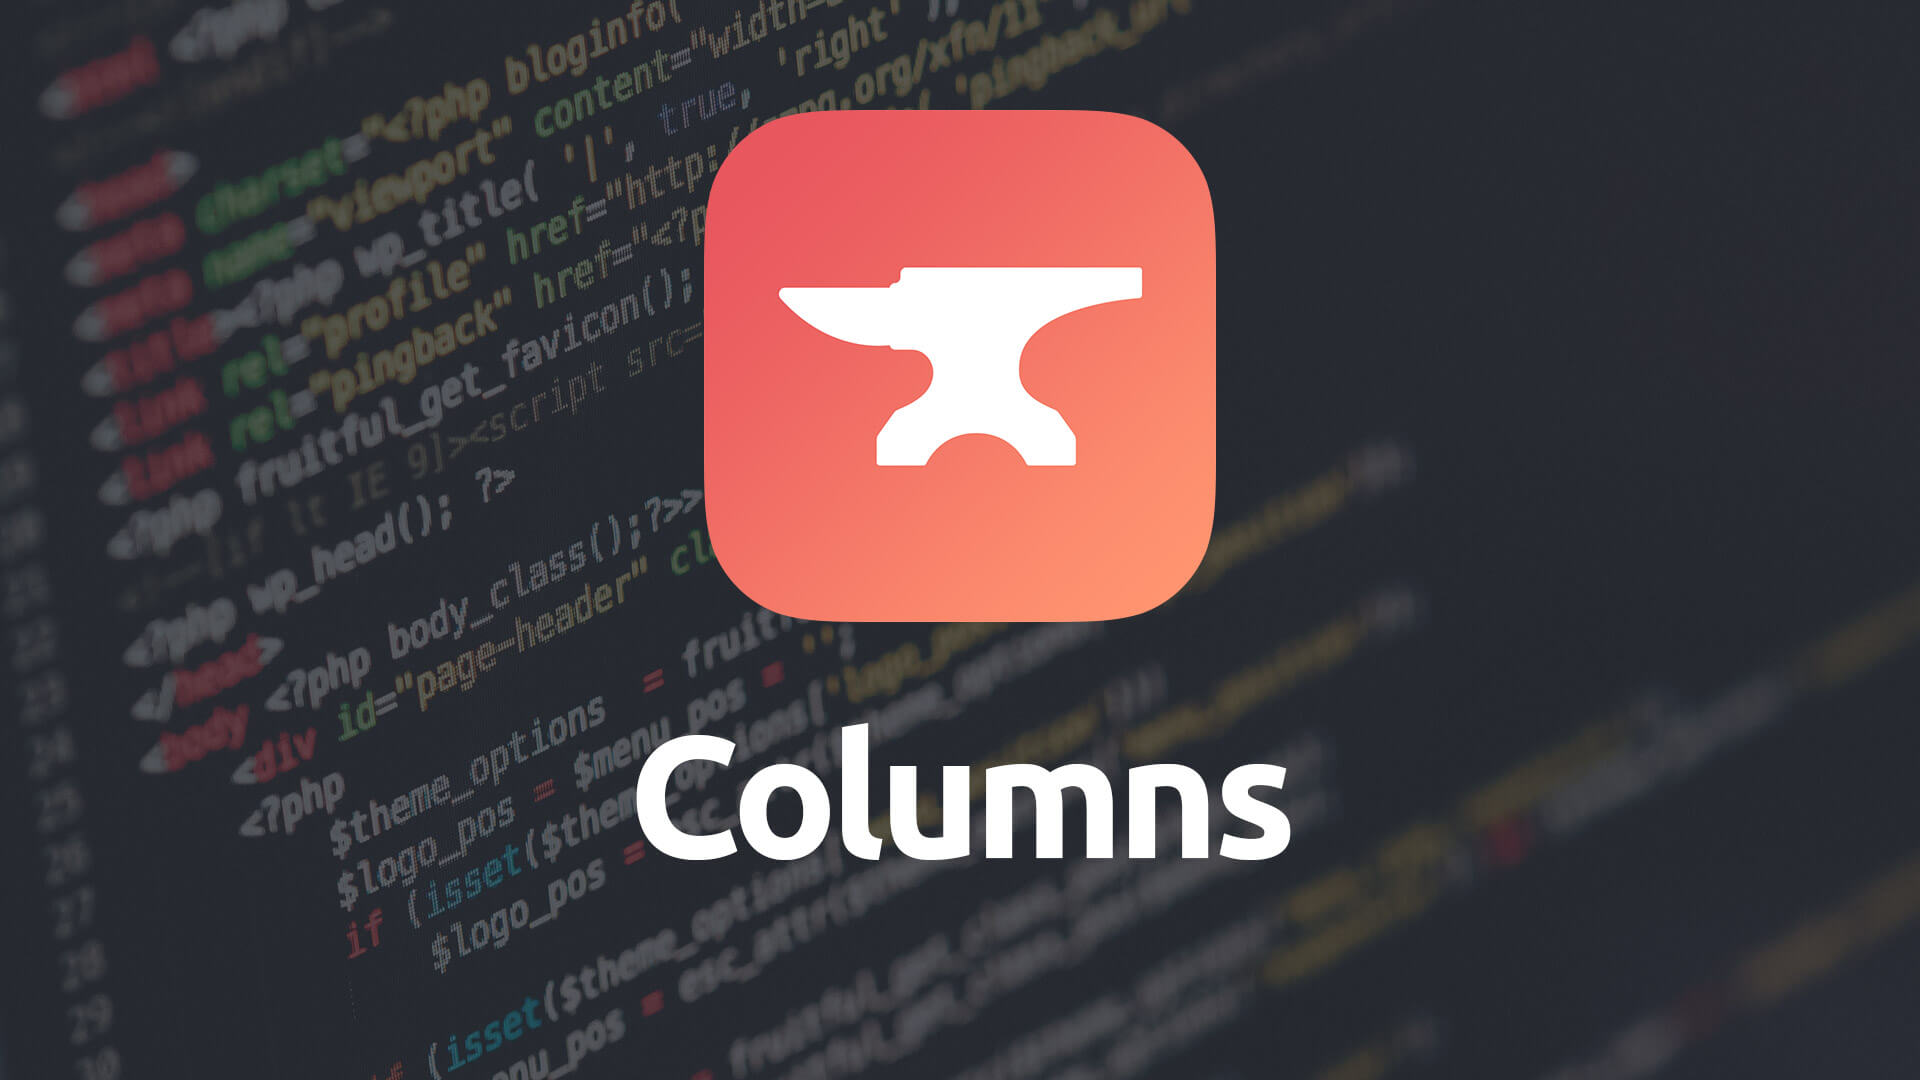 Using the Columns Stack